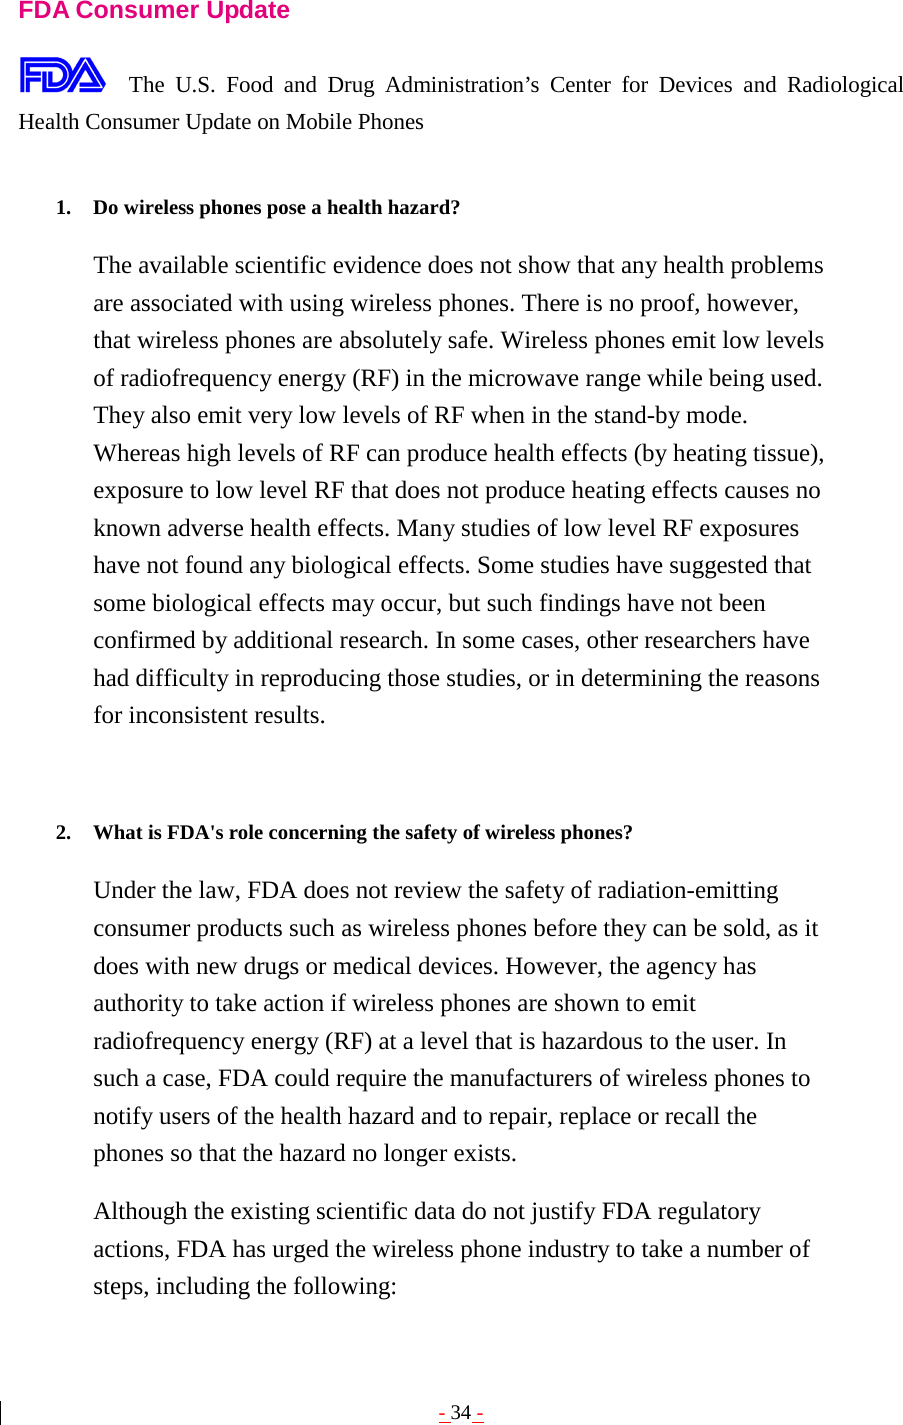 - 34 -  FDA Consumer Update  The U.S. Food and Drug Administration’s Center for Devices and Radiological Health Consumer Update on Mobile Phones  1. Do wireless phones pose a health hazard?   The available scientific evidence does not show that any health problems are associated with using wireless phones. There is no proof, however, that wireless phones are absolutely safe. Wireless phones emit low levels of radiofrequency energy (RF) in the microwave range while being used. They also emit very low levels of RF when in the stand-by mode. Whereas high levels of RF can produce health effects (by heating tissue), exposure to low level RF that does not produce heating effects causes no known adverse health effects. Many studies of low level RF exposures have not found any biological effects. Some studies have suggested that some biological effects may occur, but such findings have not been confirmed by additional research. In some cases, other researchers have had difficulty in reproducing those studies, or in determining the reasons for inconsistent results.   2. What is FDA&apos;s role concerning the safety of wireless phones?   Under the law, FDA does not review the safety of radiation-emitting consumer products such as wireless phones before they can be sold, as it does with new drugs or medical devices. However, the agency has authority to take action if wireless phones are shown to emit radiofrequency energy (RF) at a level that is hazardous to the user. In such a case, FDA could require the manufacturers of wireless phones to notify users of the health hazard and to repair, replace or recall the phones so that the hazard no longer exists. Although the existing scientific data do not justify FDA regulatory actions, FDA has urged the wireless phone industry to take a number of steps, including the following: 